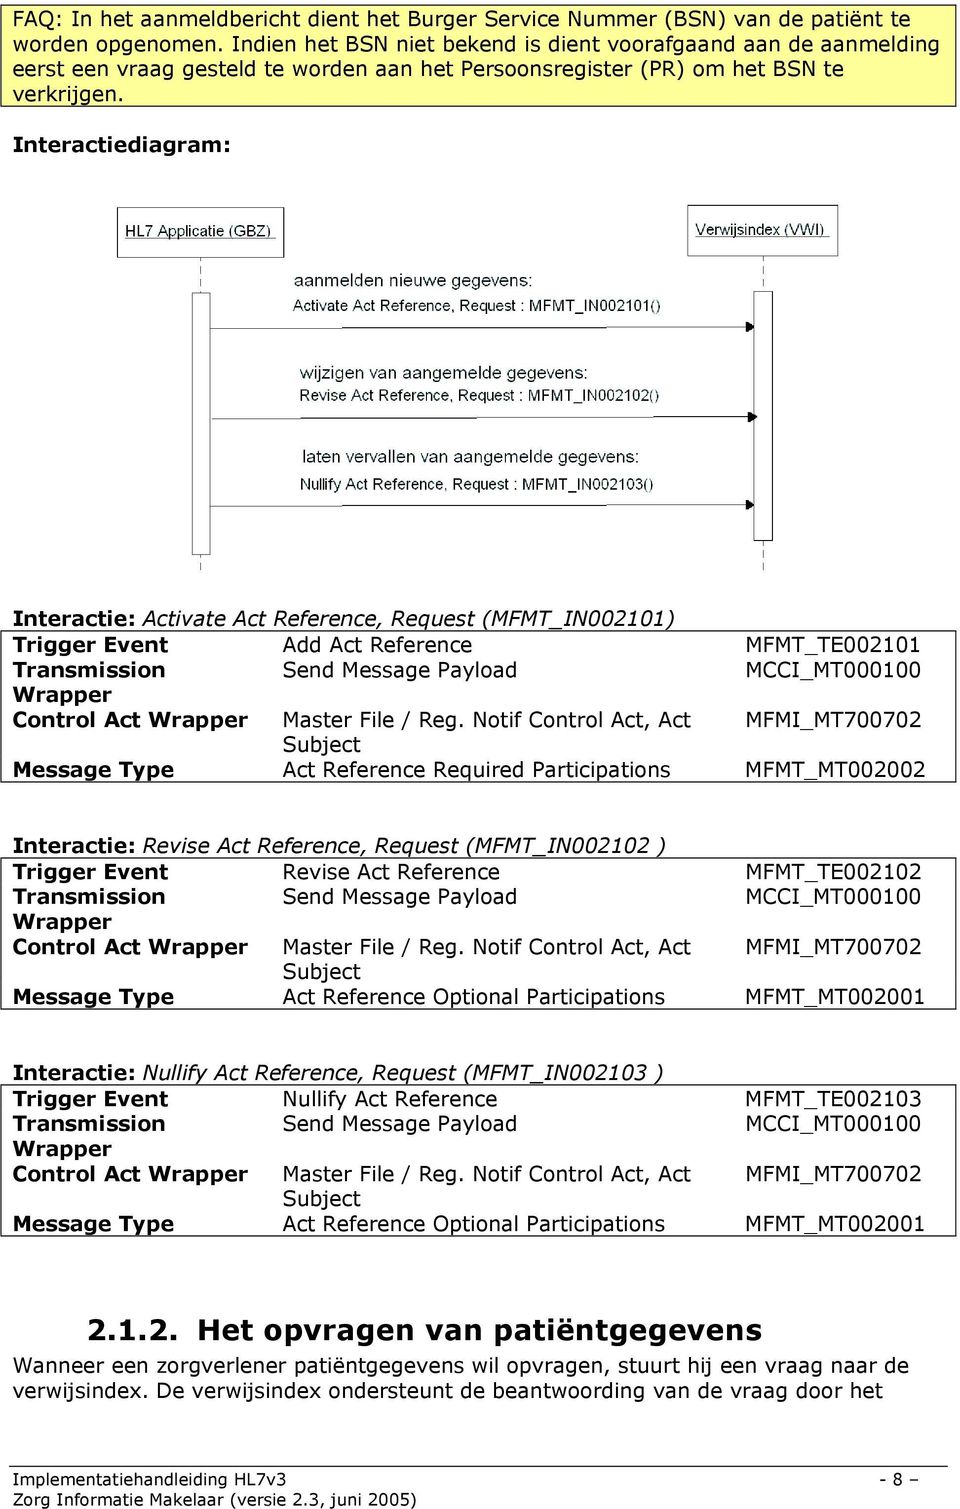 Interactiediagram: Interactie: Activate Act Reference, Request (MFMT_IN002101) Trigger Event Add Act Reference MFMT_TE002101 Transmission Send Message Payload MCCI_MT000100 Wrapper Control Act